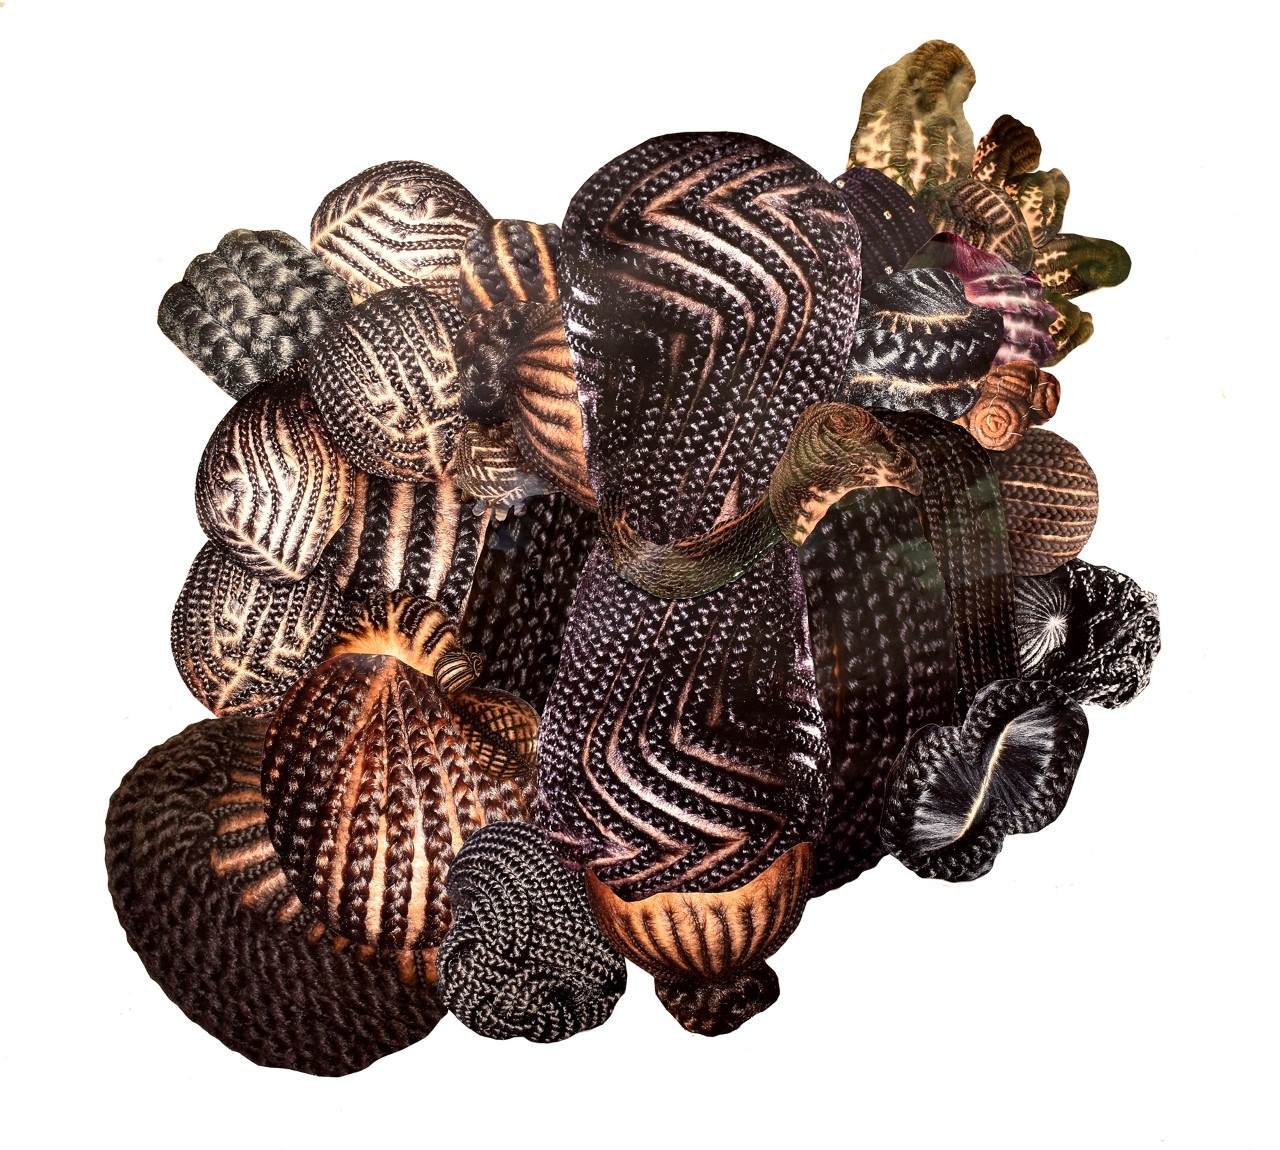 An abstract shape made-up of multiple images of braided, woven Black and Brown hair.